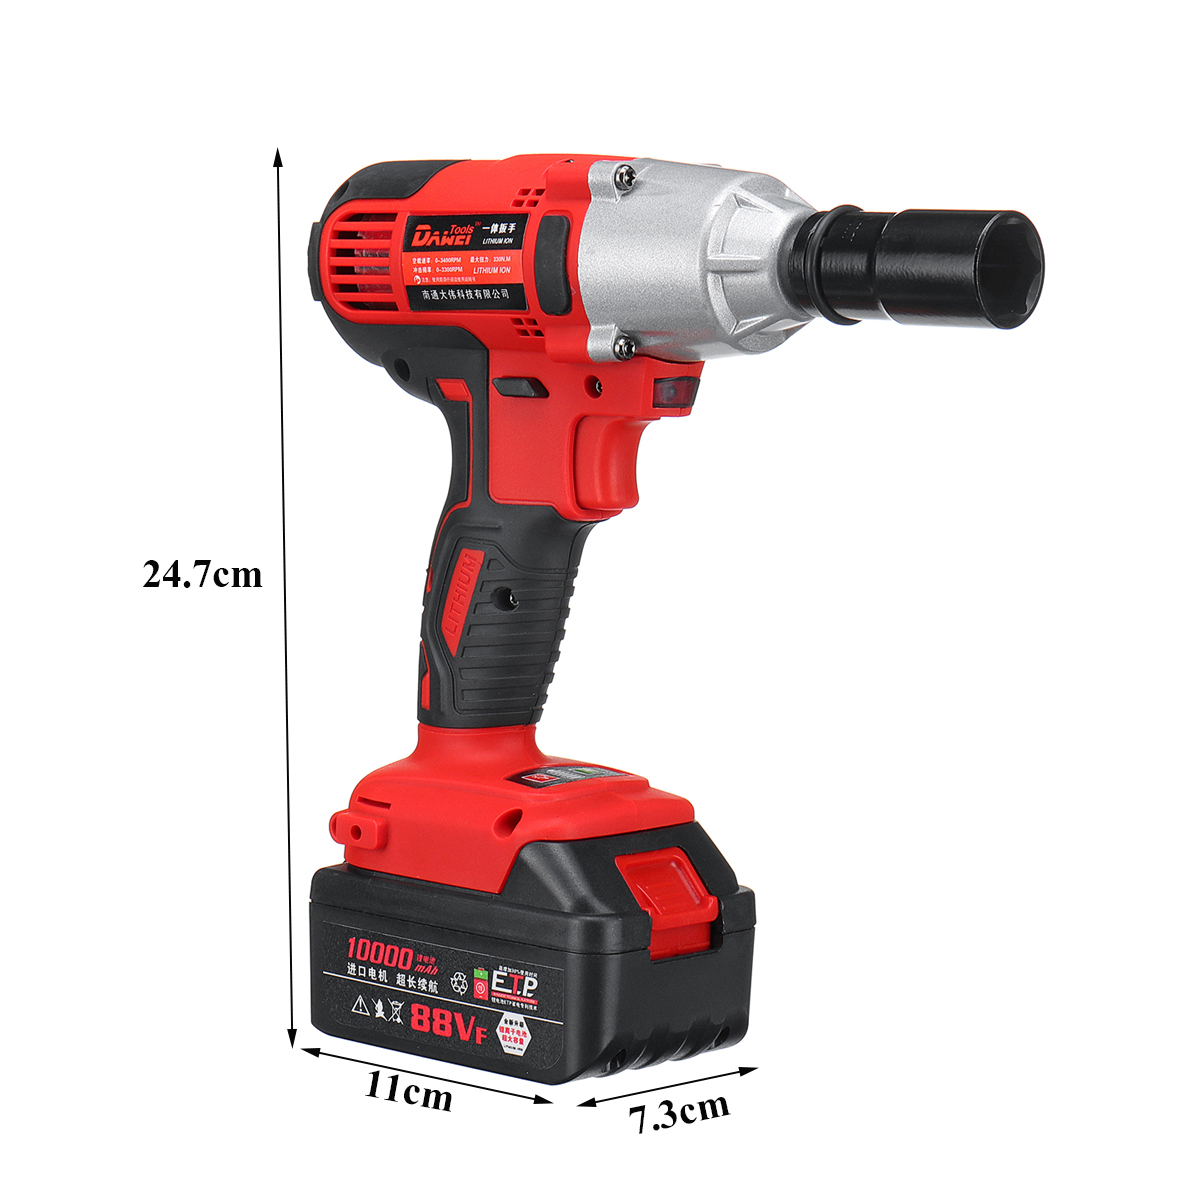 21V-Li-ion-Electric-Impact-Wrench-Cordless-High-Torque-Power-Wrench-with-2-Battery-1283395-7